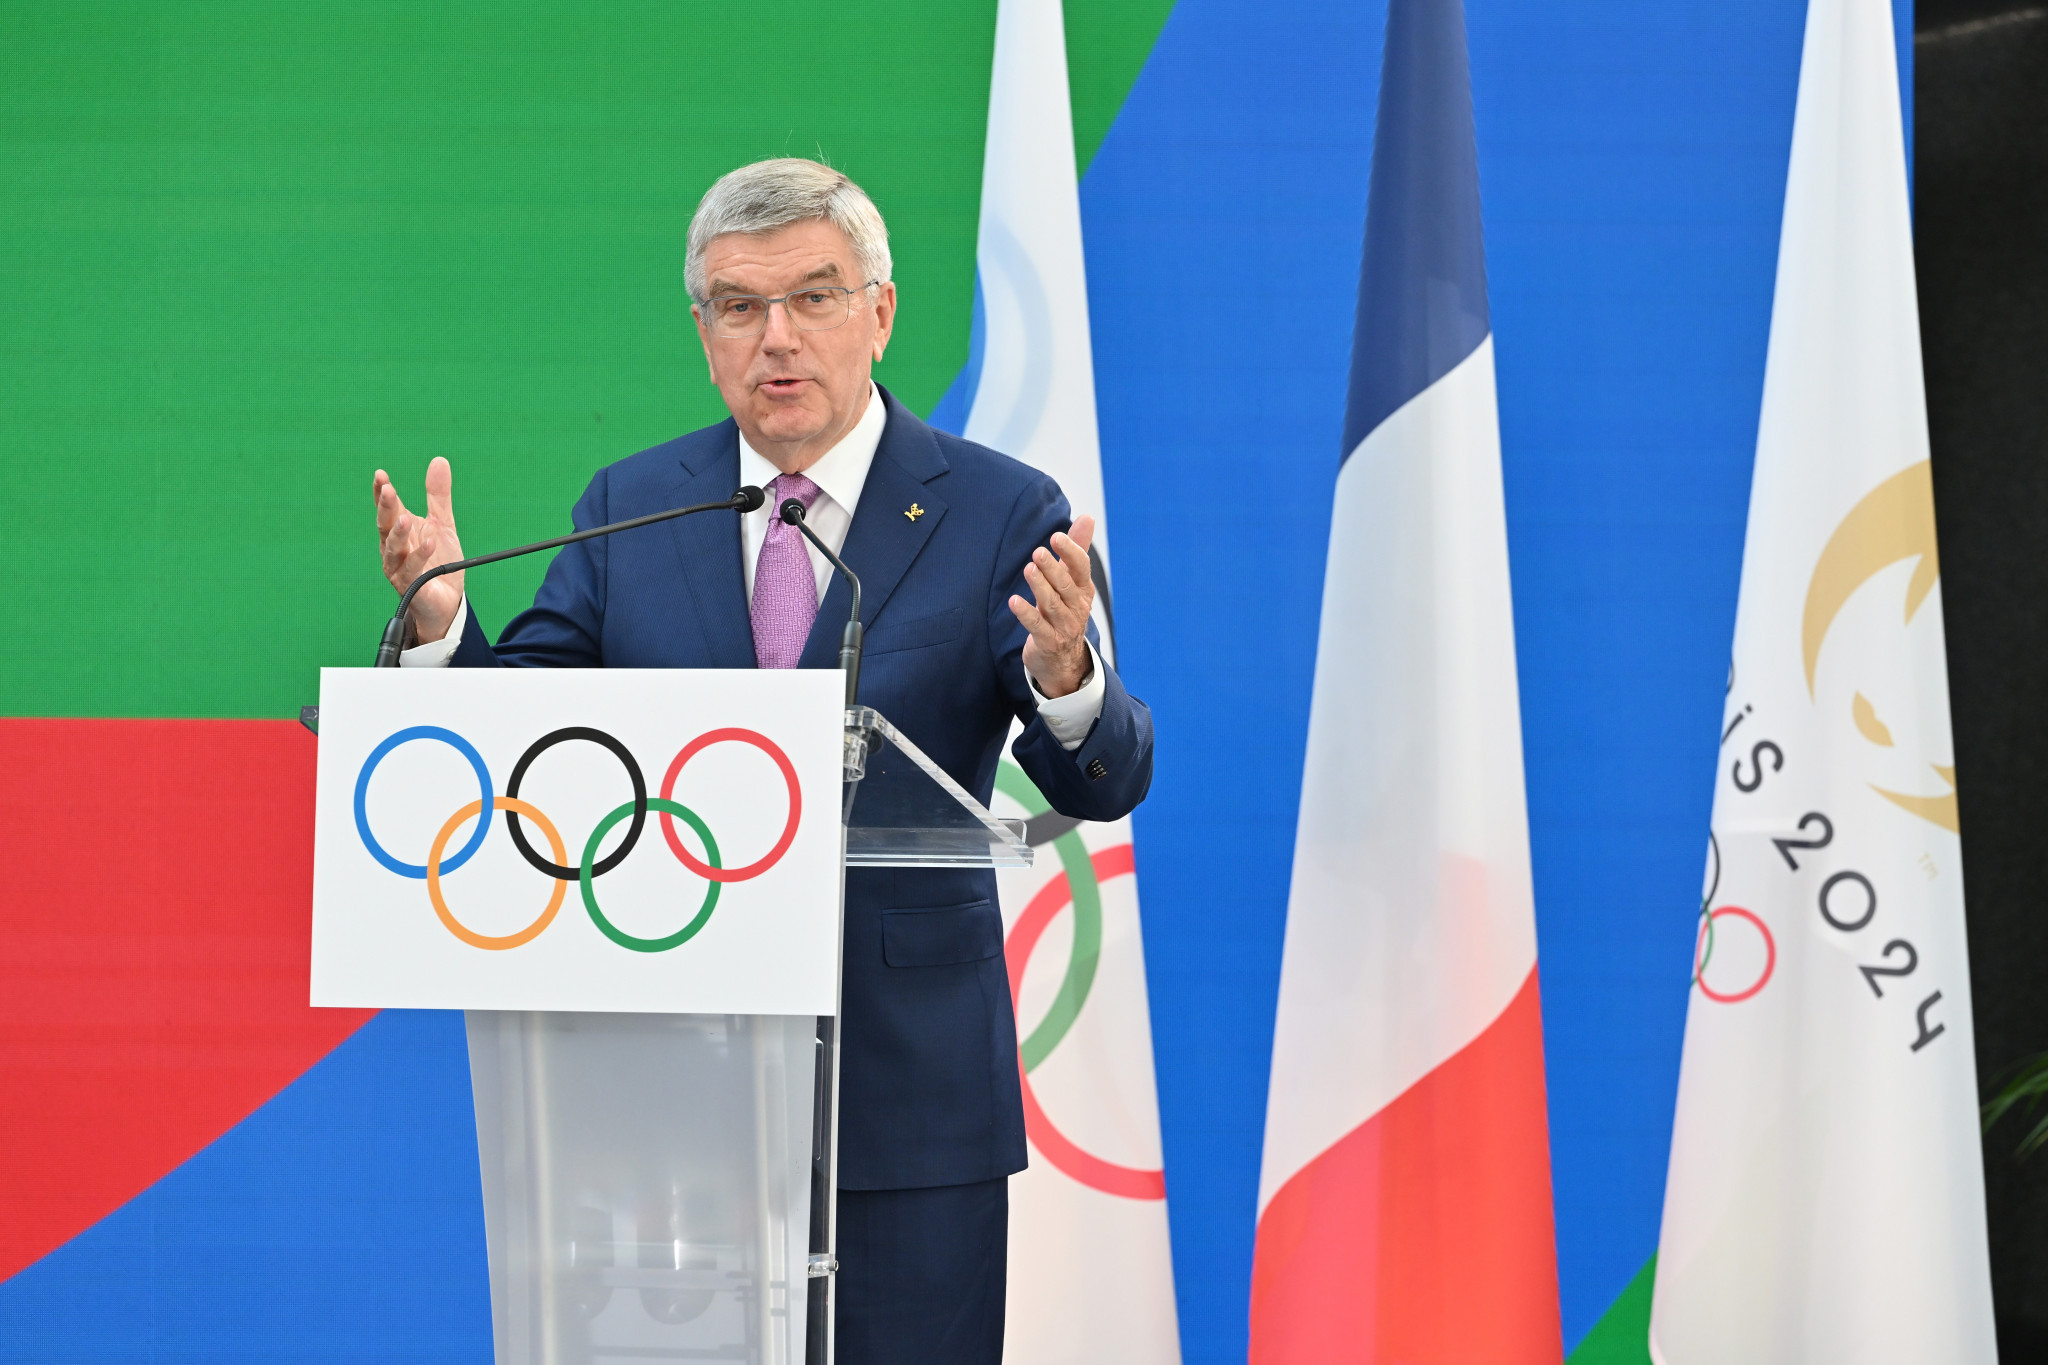 IOC President Thomas Bach told an International Athletes Forum that he was hopeful that competitors from all countries could feature at Paris 2024 ©Getty Images